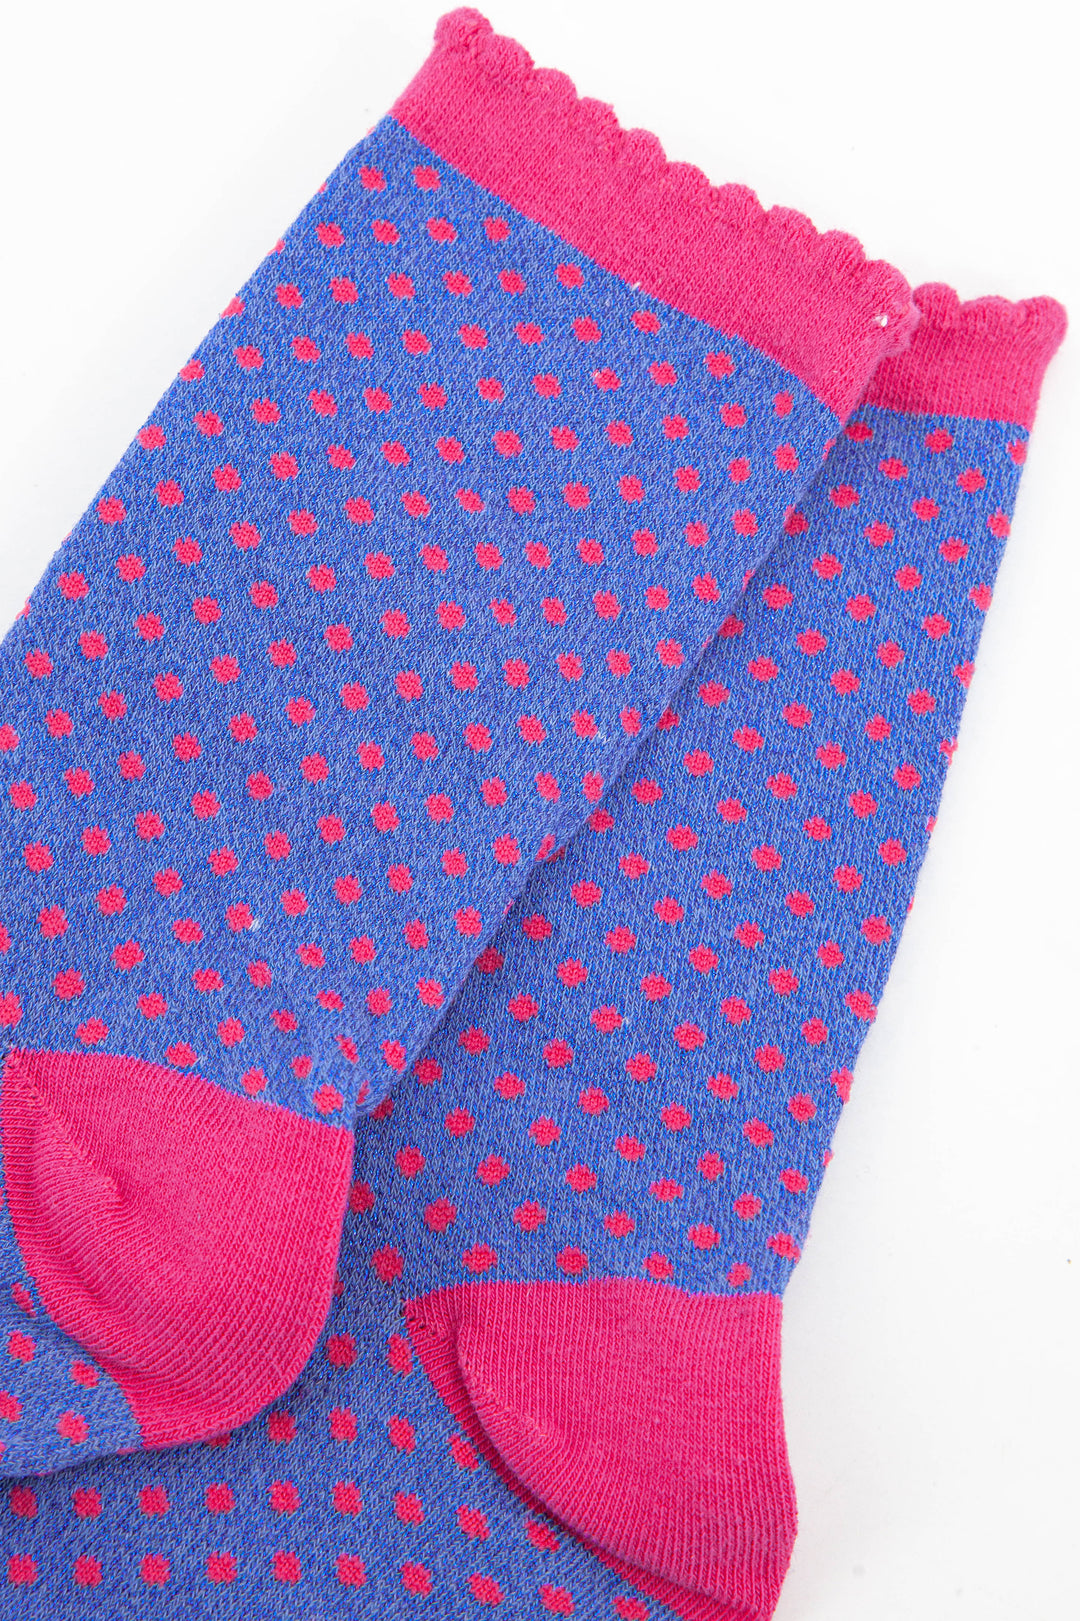 close up of the small spotted scattered pattern on the sparkly ankle socks